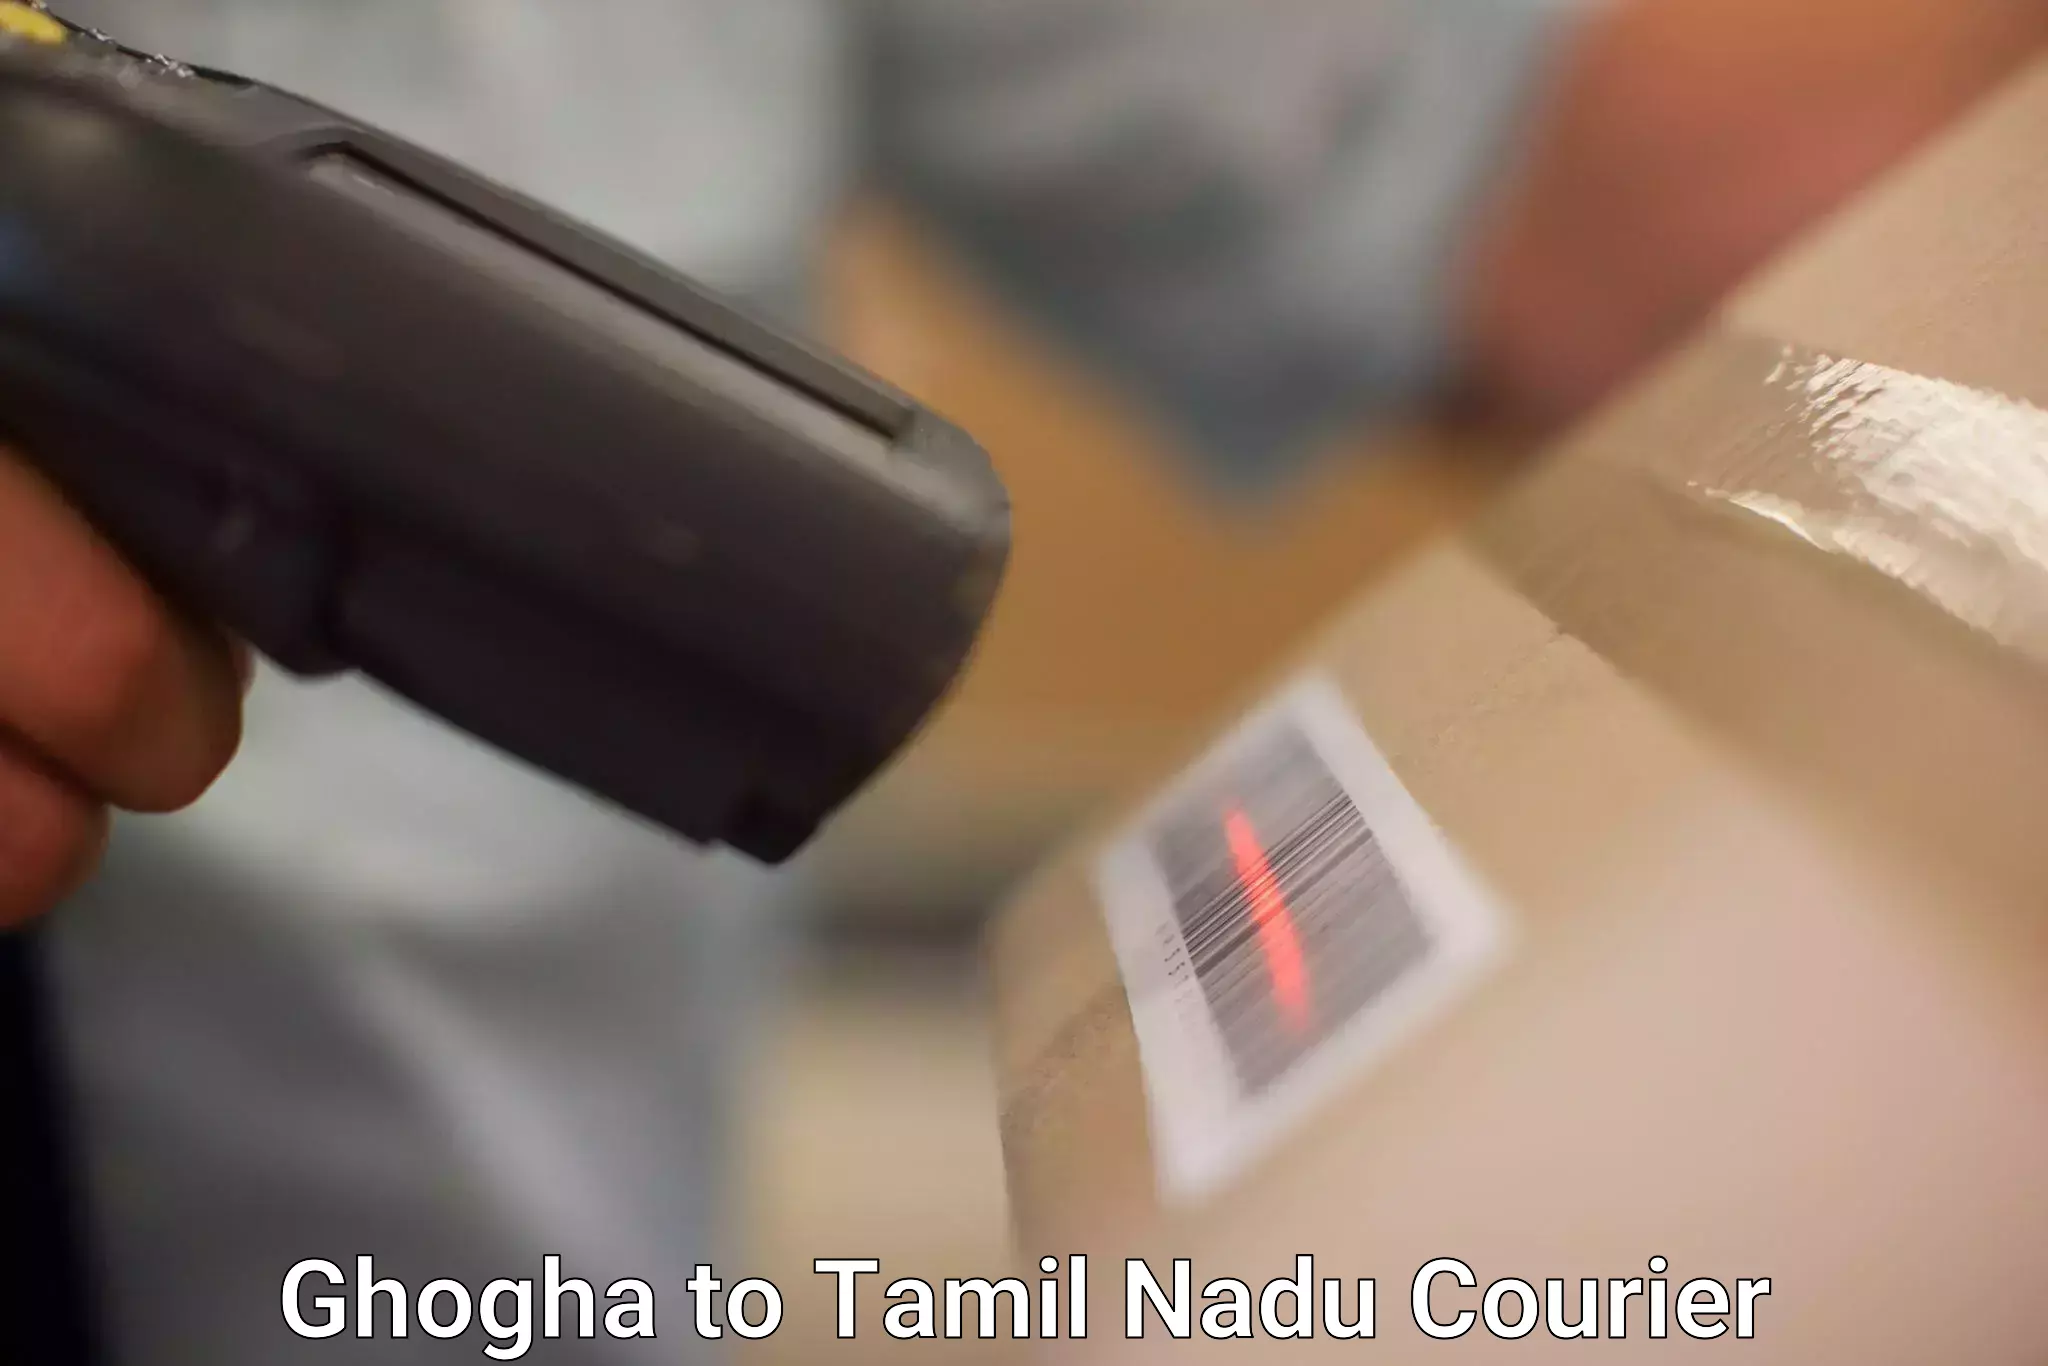 State-of-the-art courier technology Ghogha to Tirukkoyilur